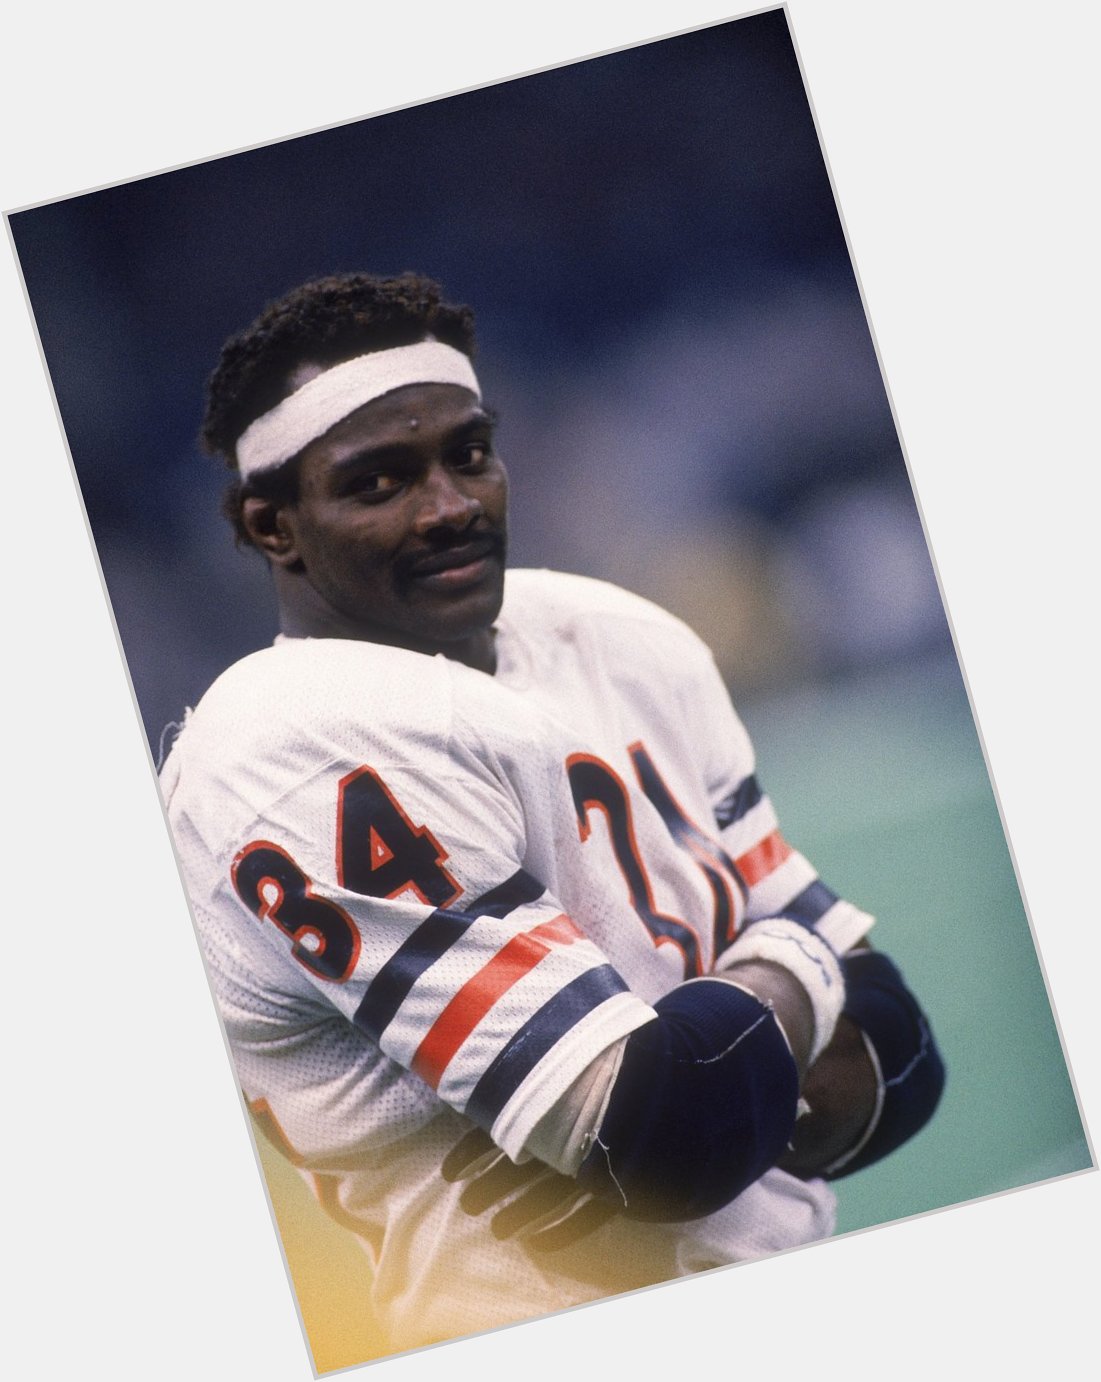 The legend Walter Payton would have been 65 today.

Happy birthday, Sweetness 